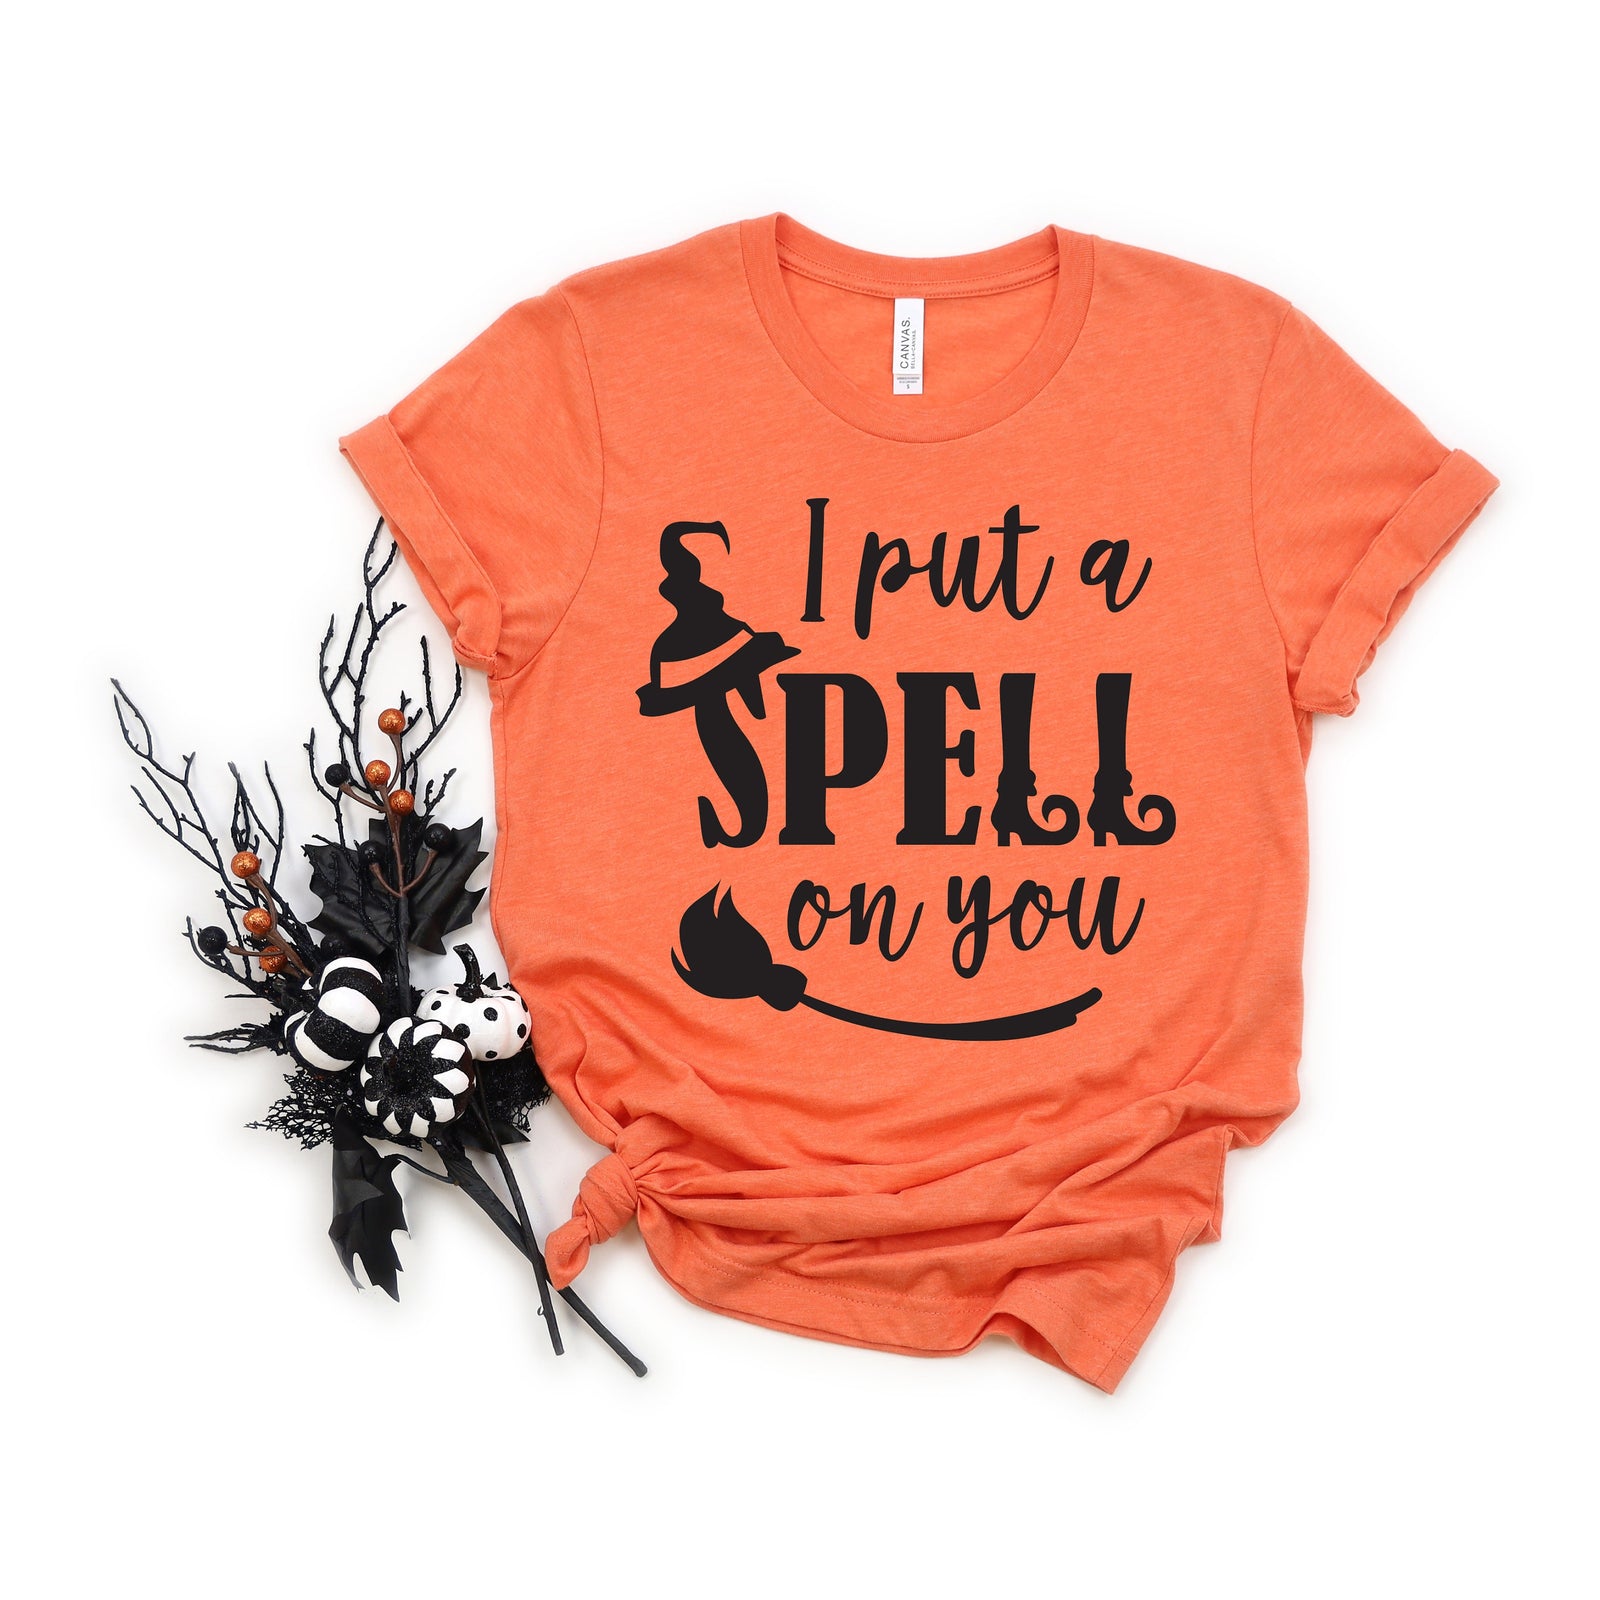 I Put a Spell on You Adult T Shirt - Halloween - Funny Not So Scary Witch Hat